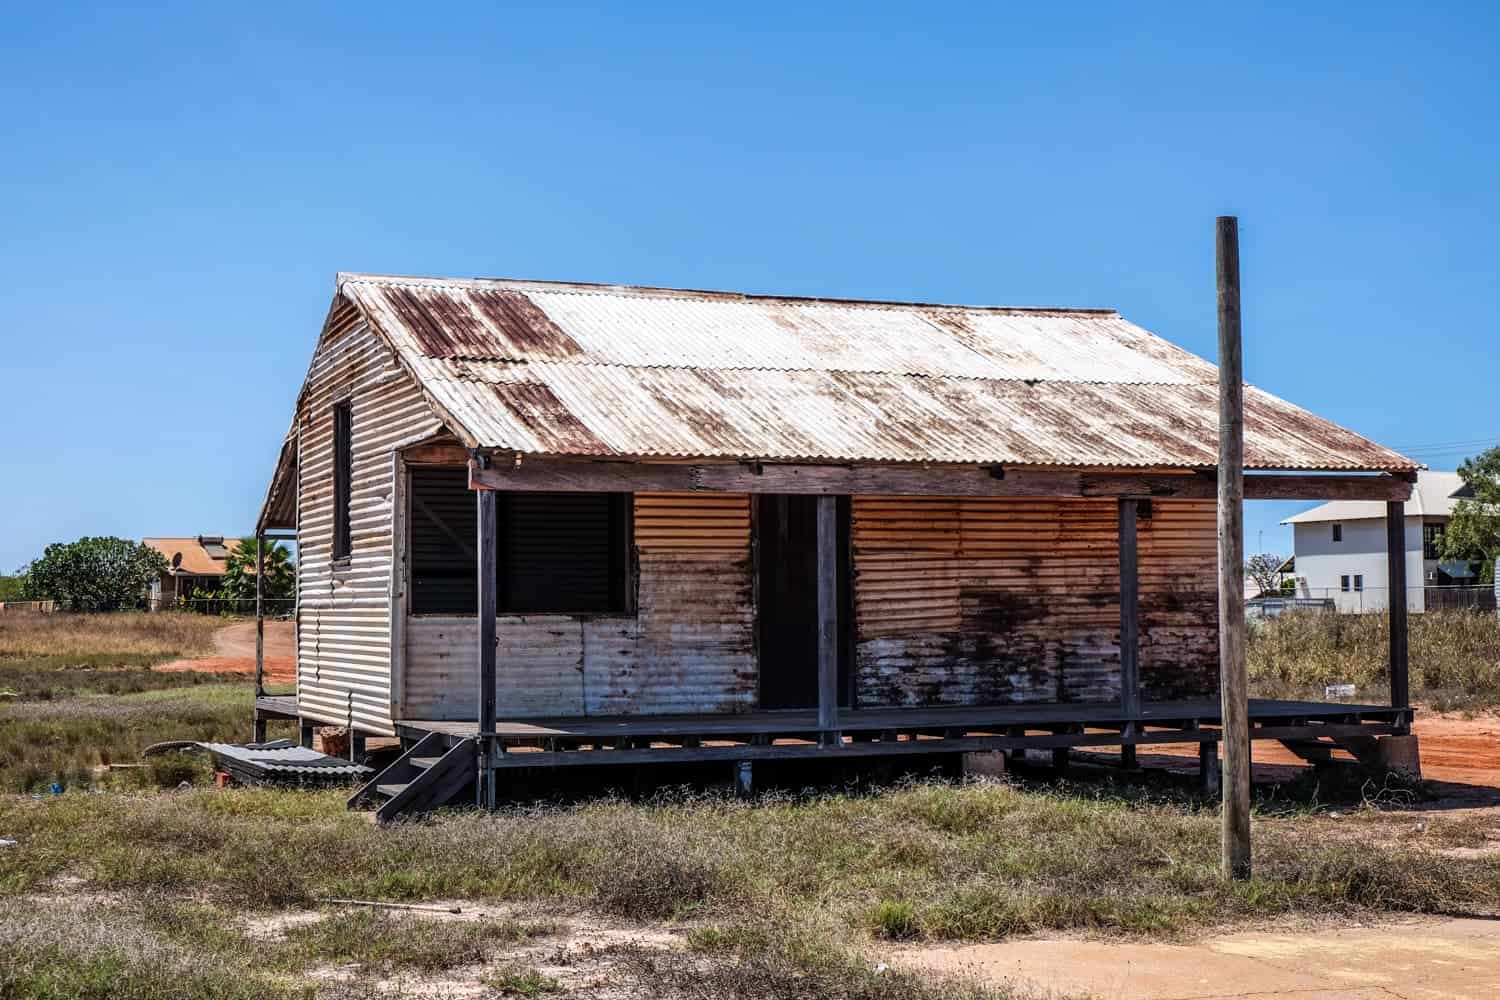 Old pearling trade house in Broome, Western Australia